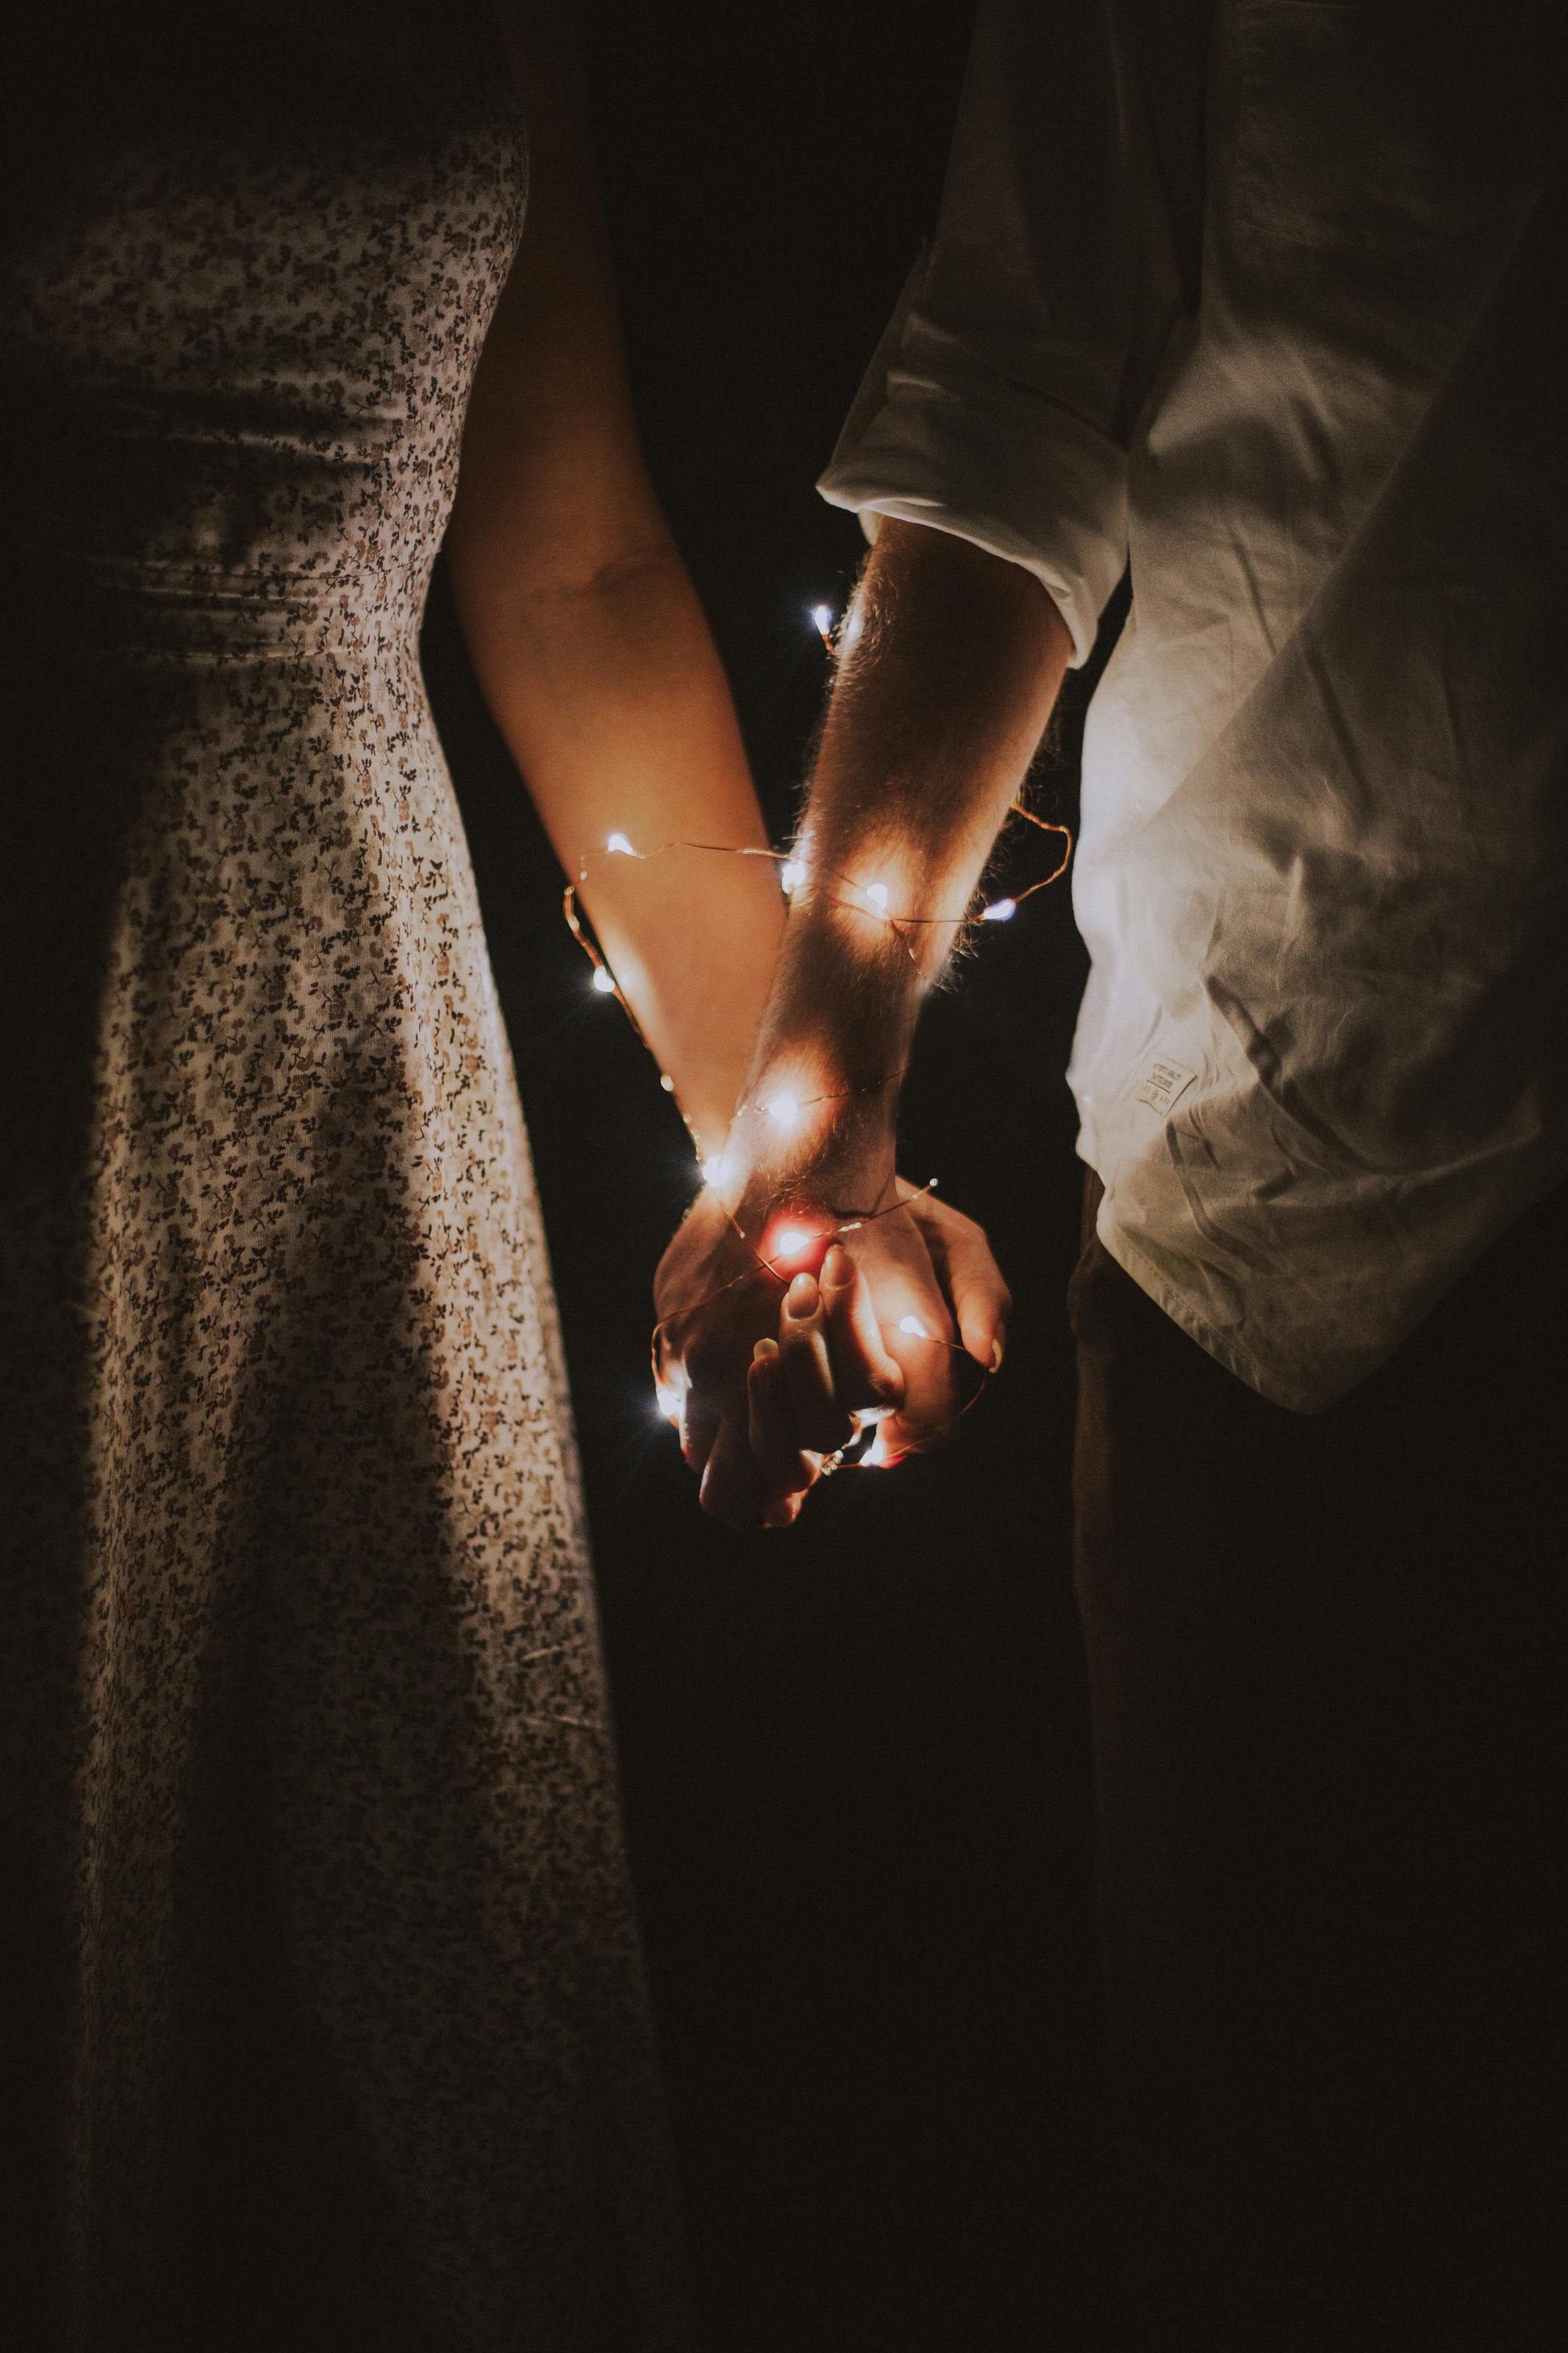 A man and a woman holding hands | Source: Pexels